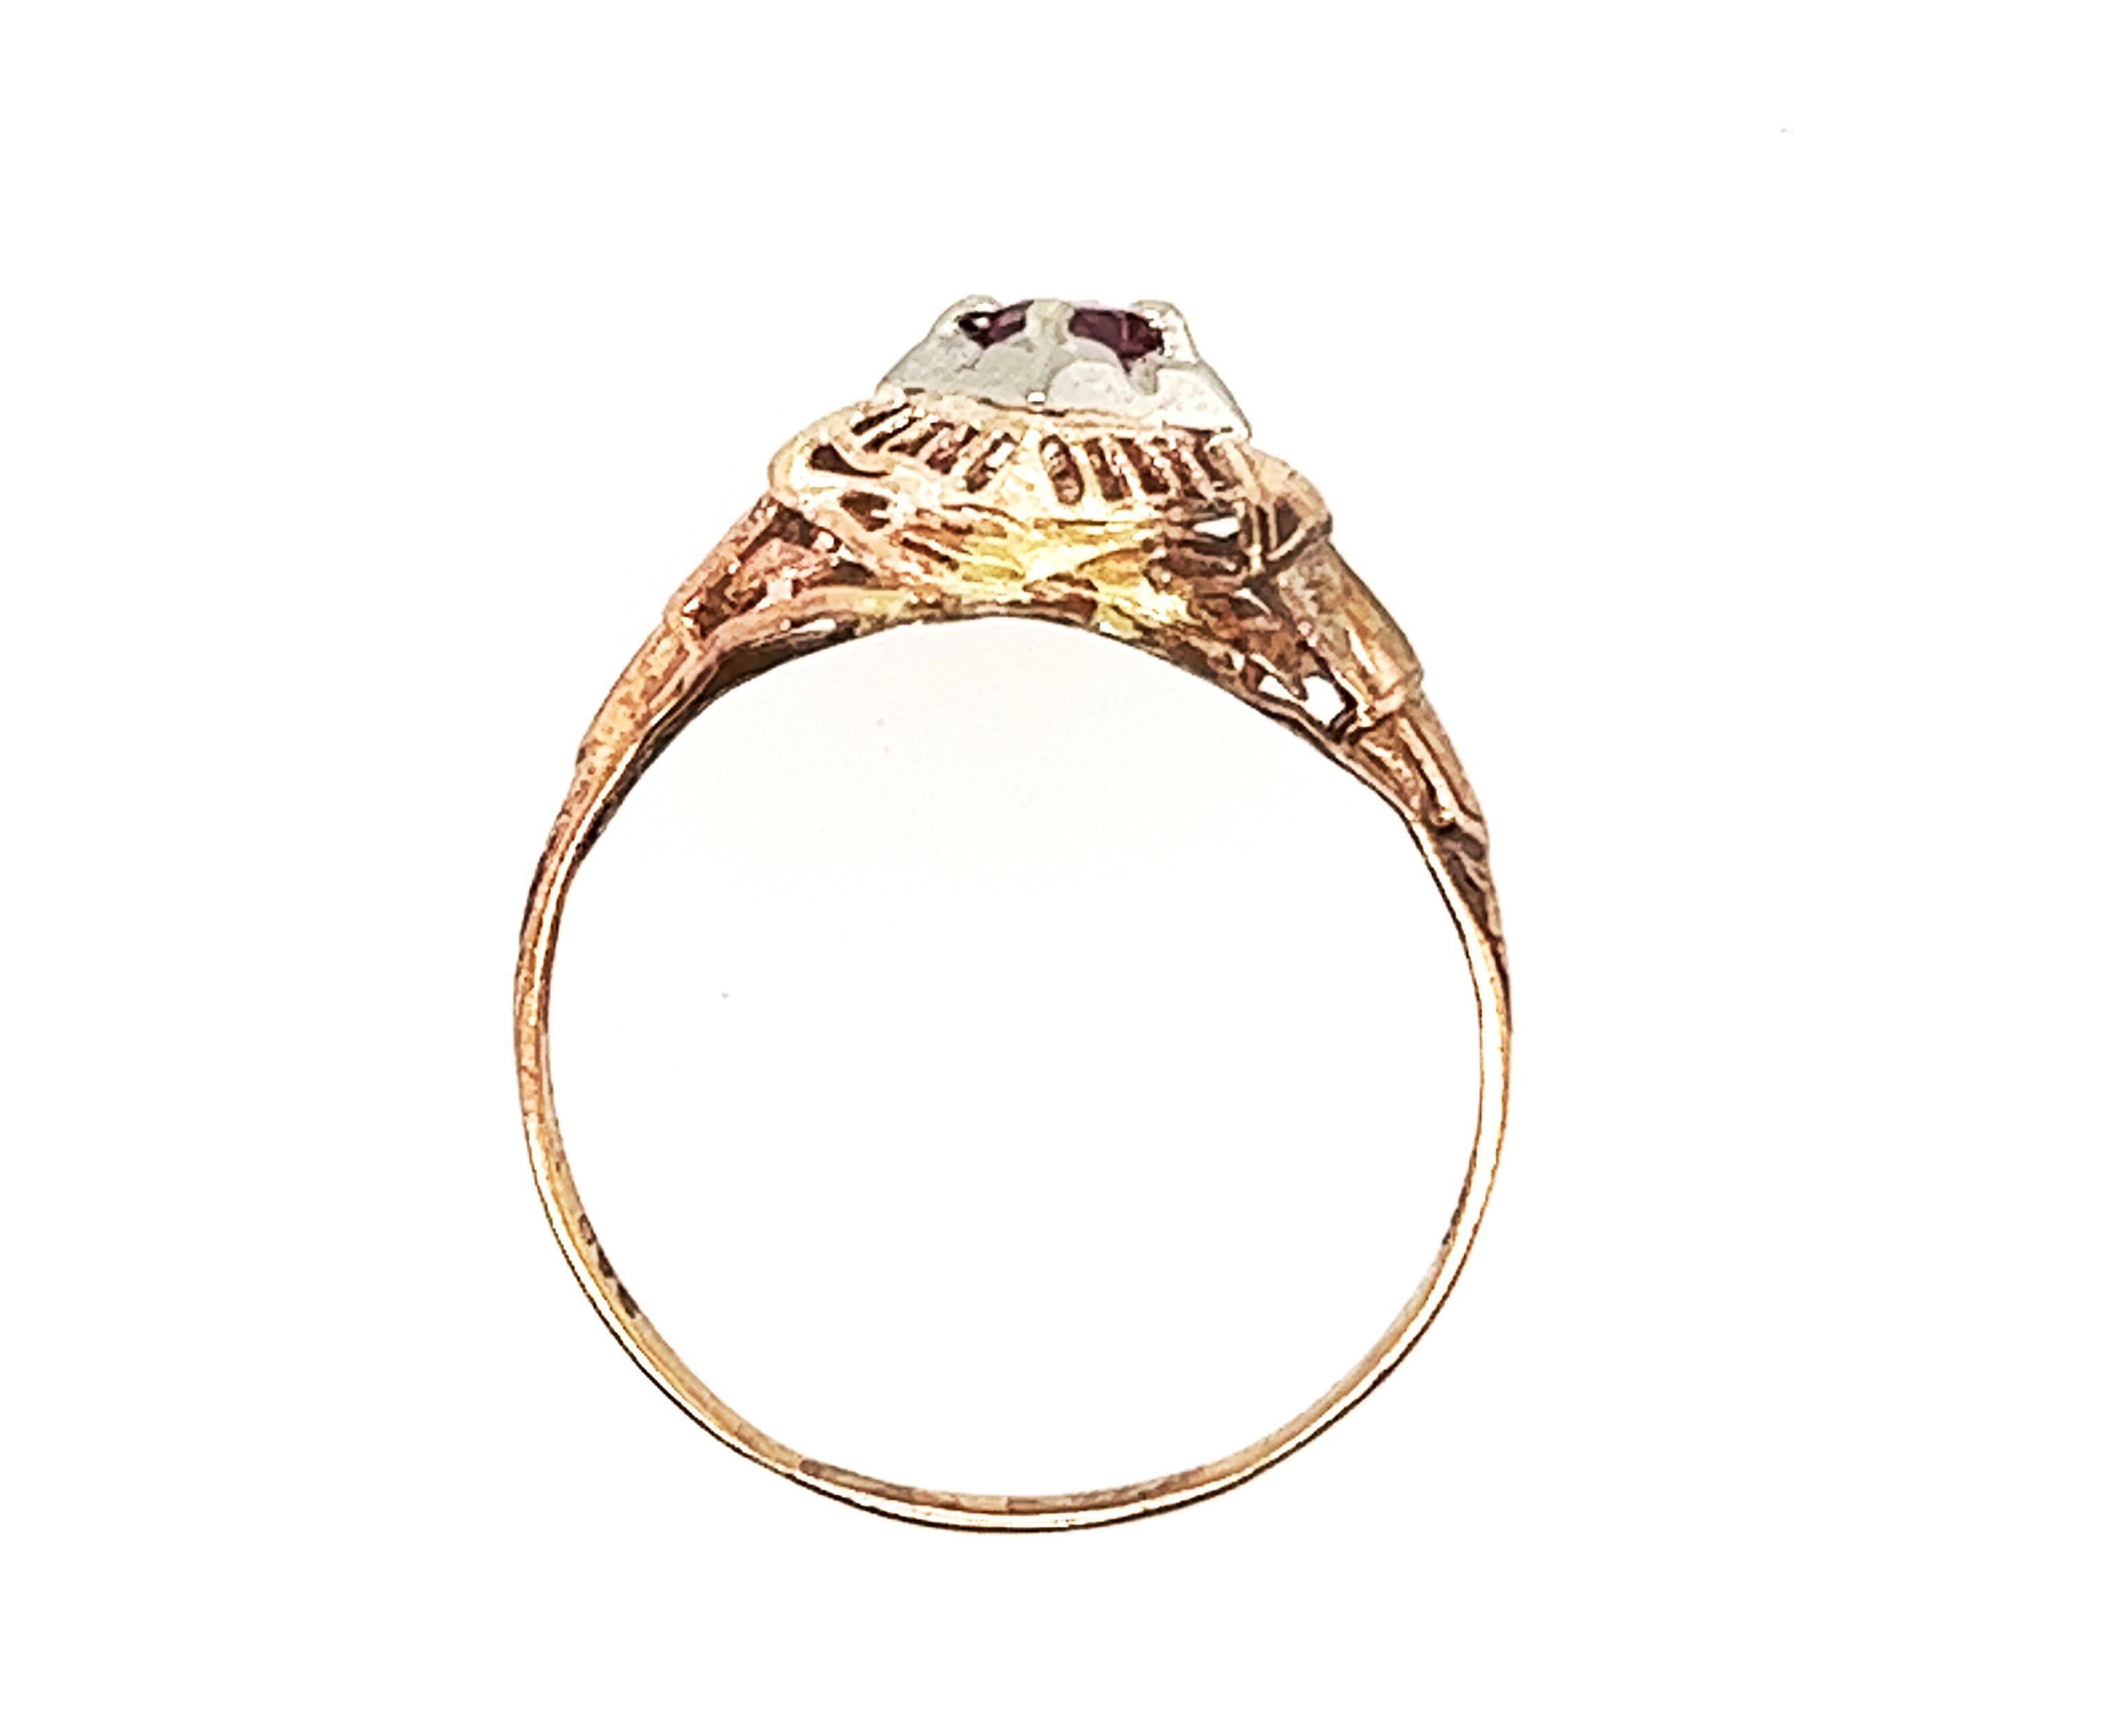 Genuine Original Antique from the 1920's Ruby Ring 1/4ct 10K Yellow & White Gold



Featuring a Gorgeous .25ct Genuine Natural Ruby Center

Filigree with Deep Hand Engraving on Shoulders

100% Natural Ruby 

.25 Carat Ruby 

10K Yellow Gold with